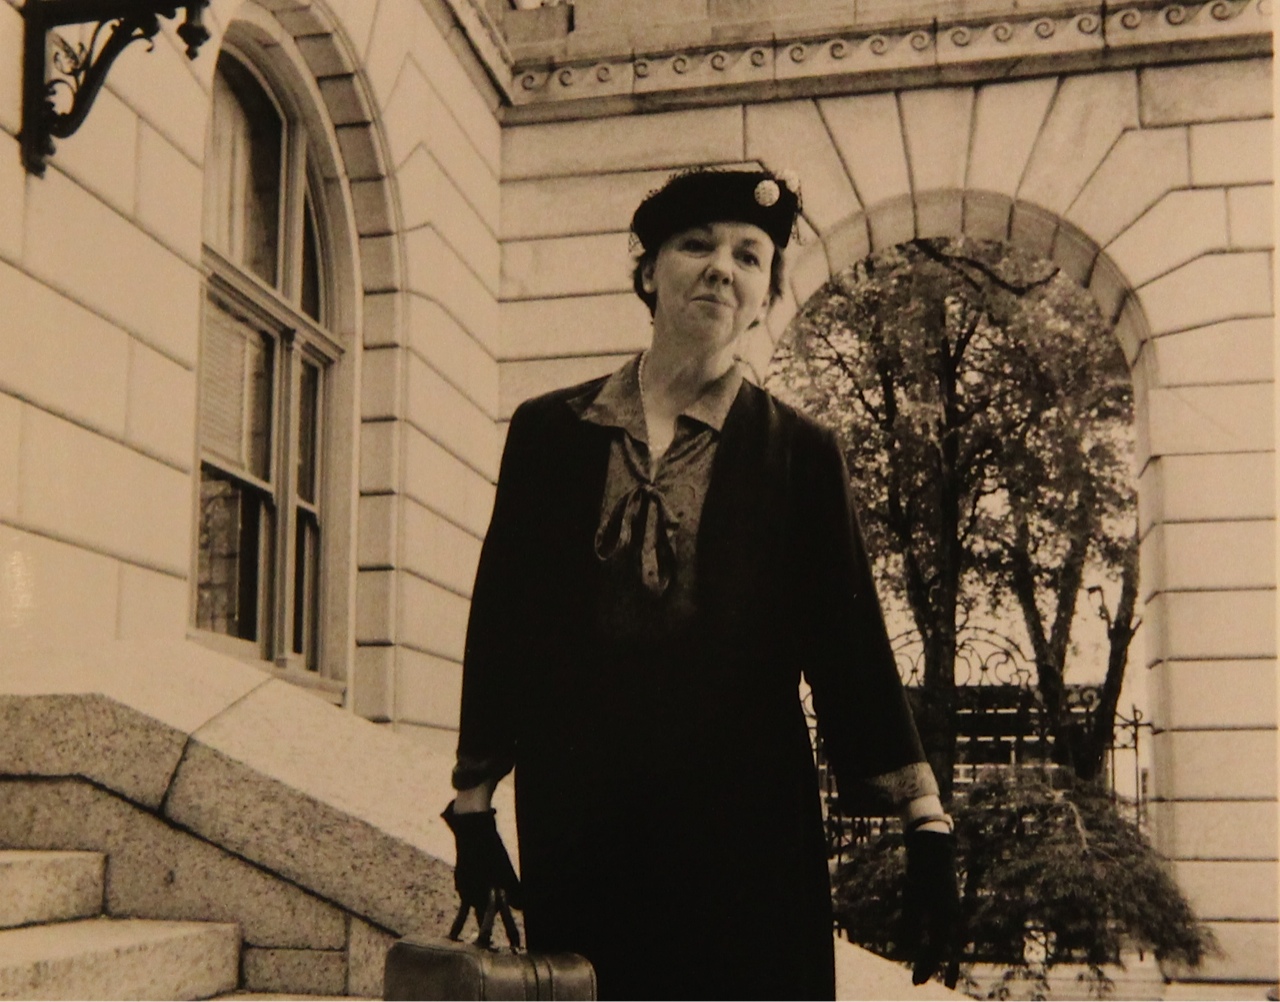 Meet Eleanor Roosevelt, as portrayed in a one-woman show by actress Jane Van Boskirk